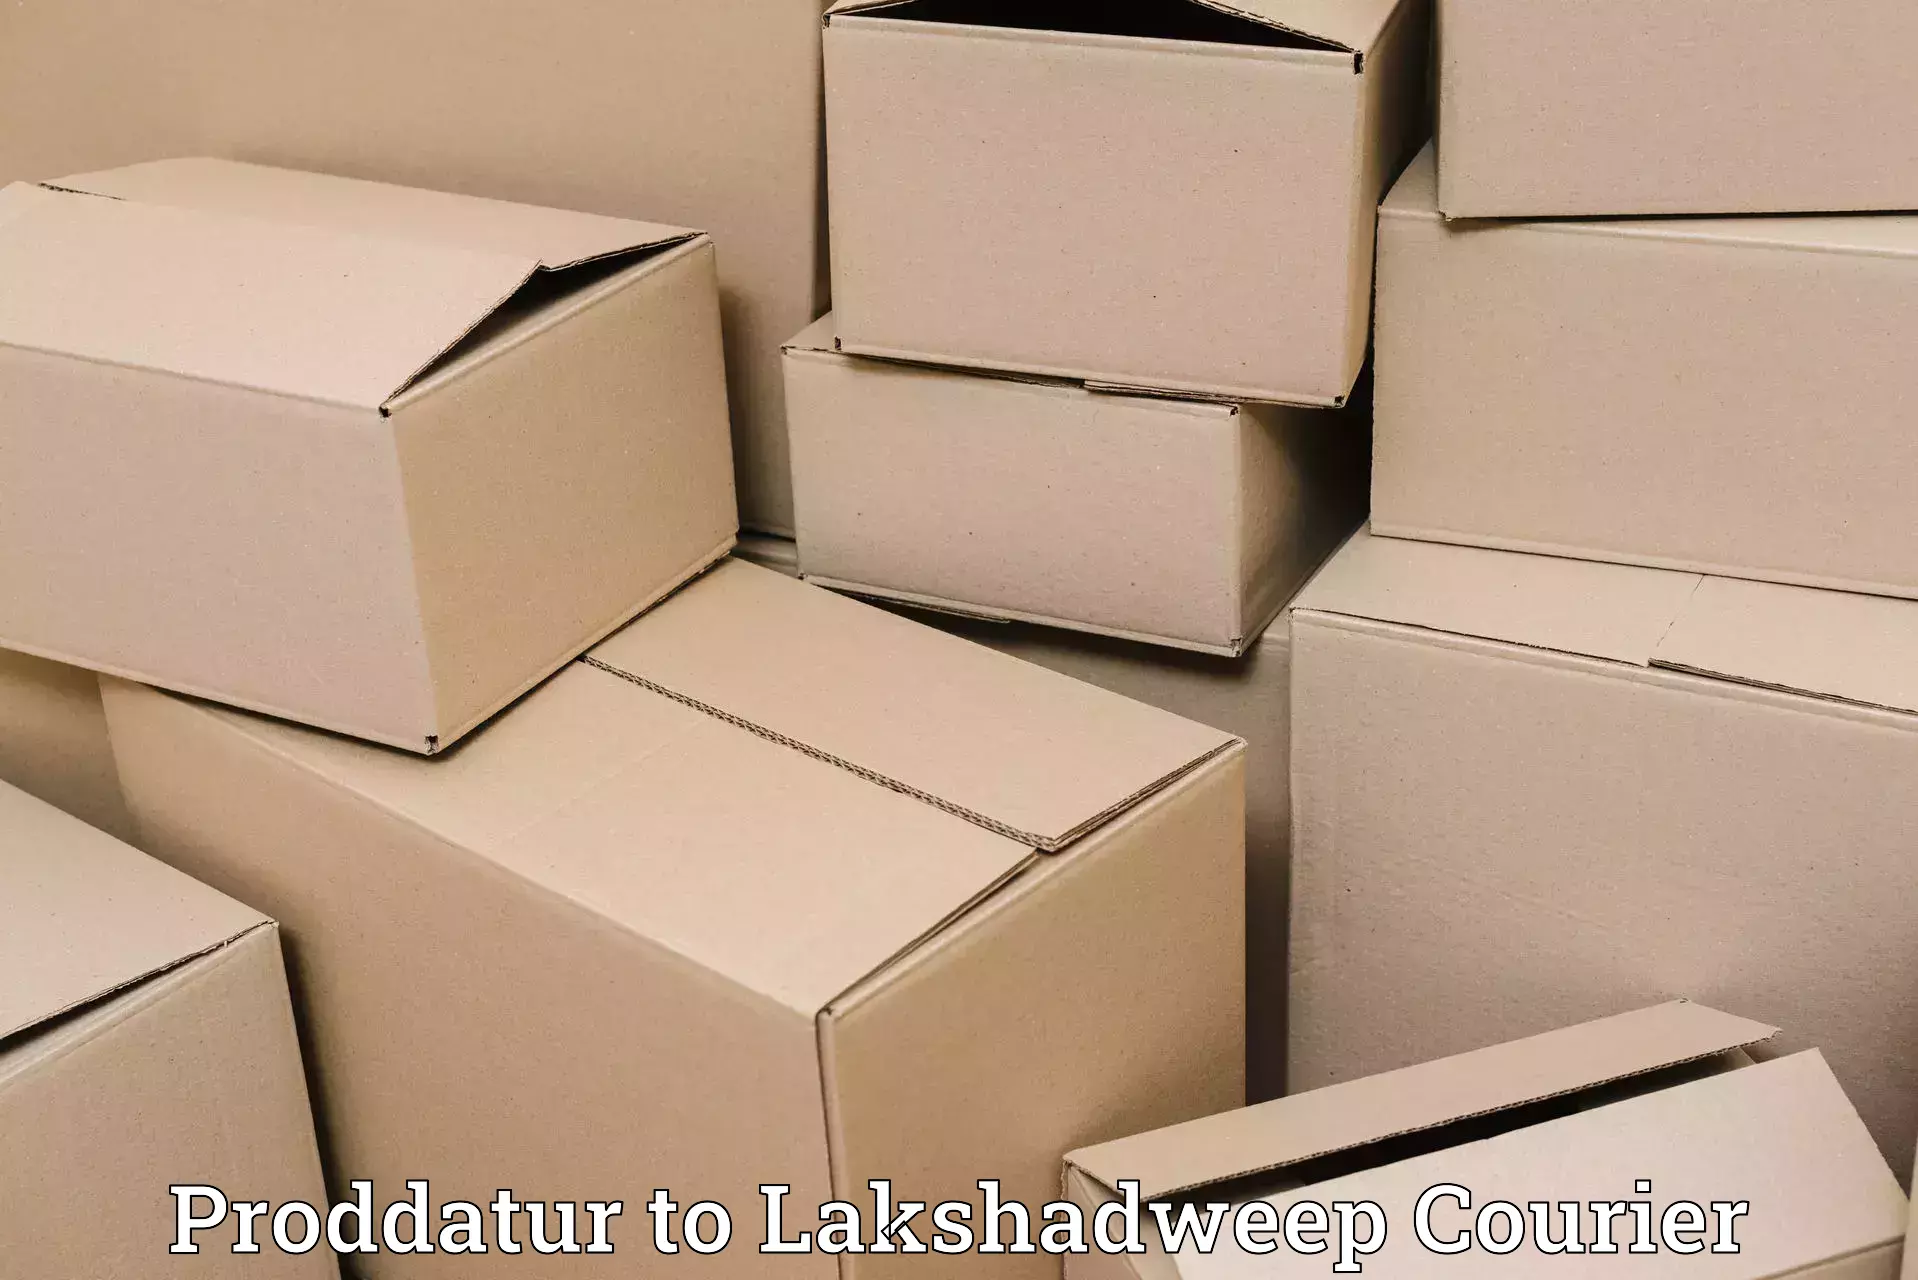 Holiday season luggage delivery in Proddatur to Lakshadweep